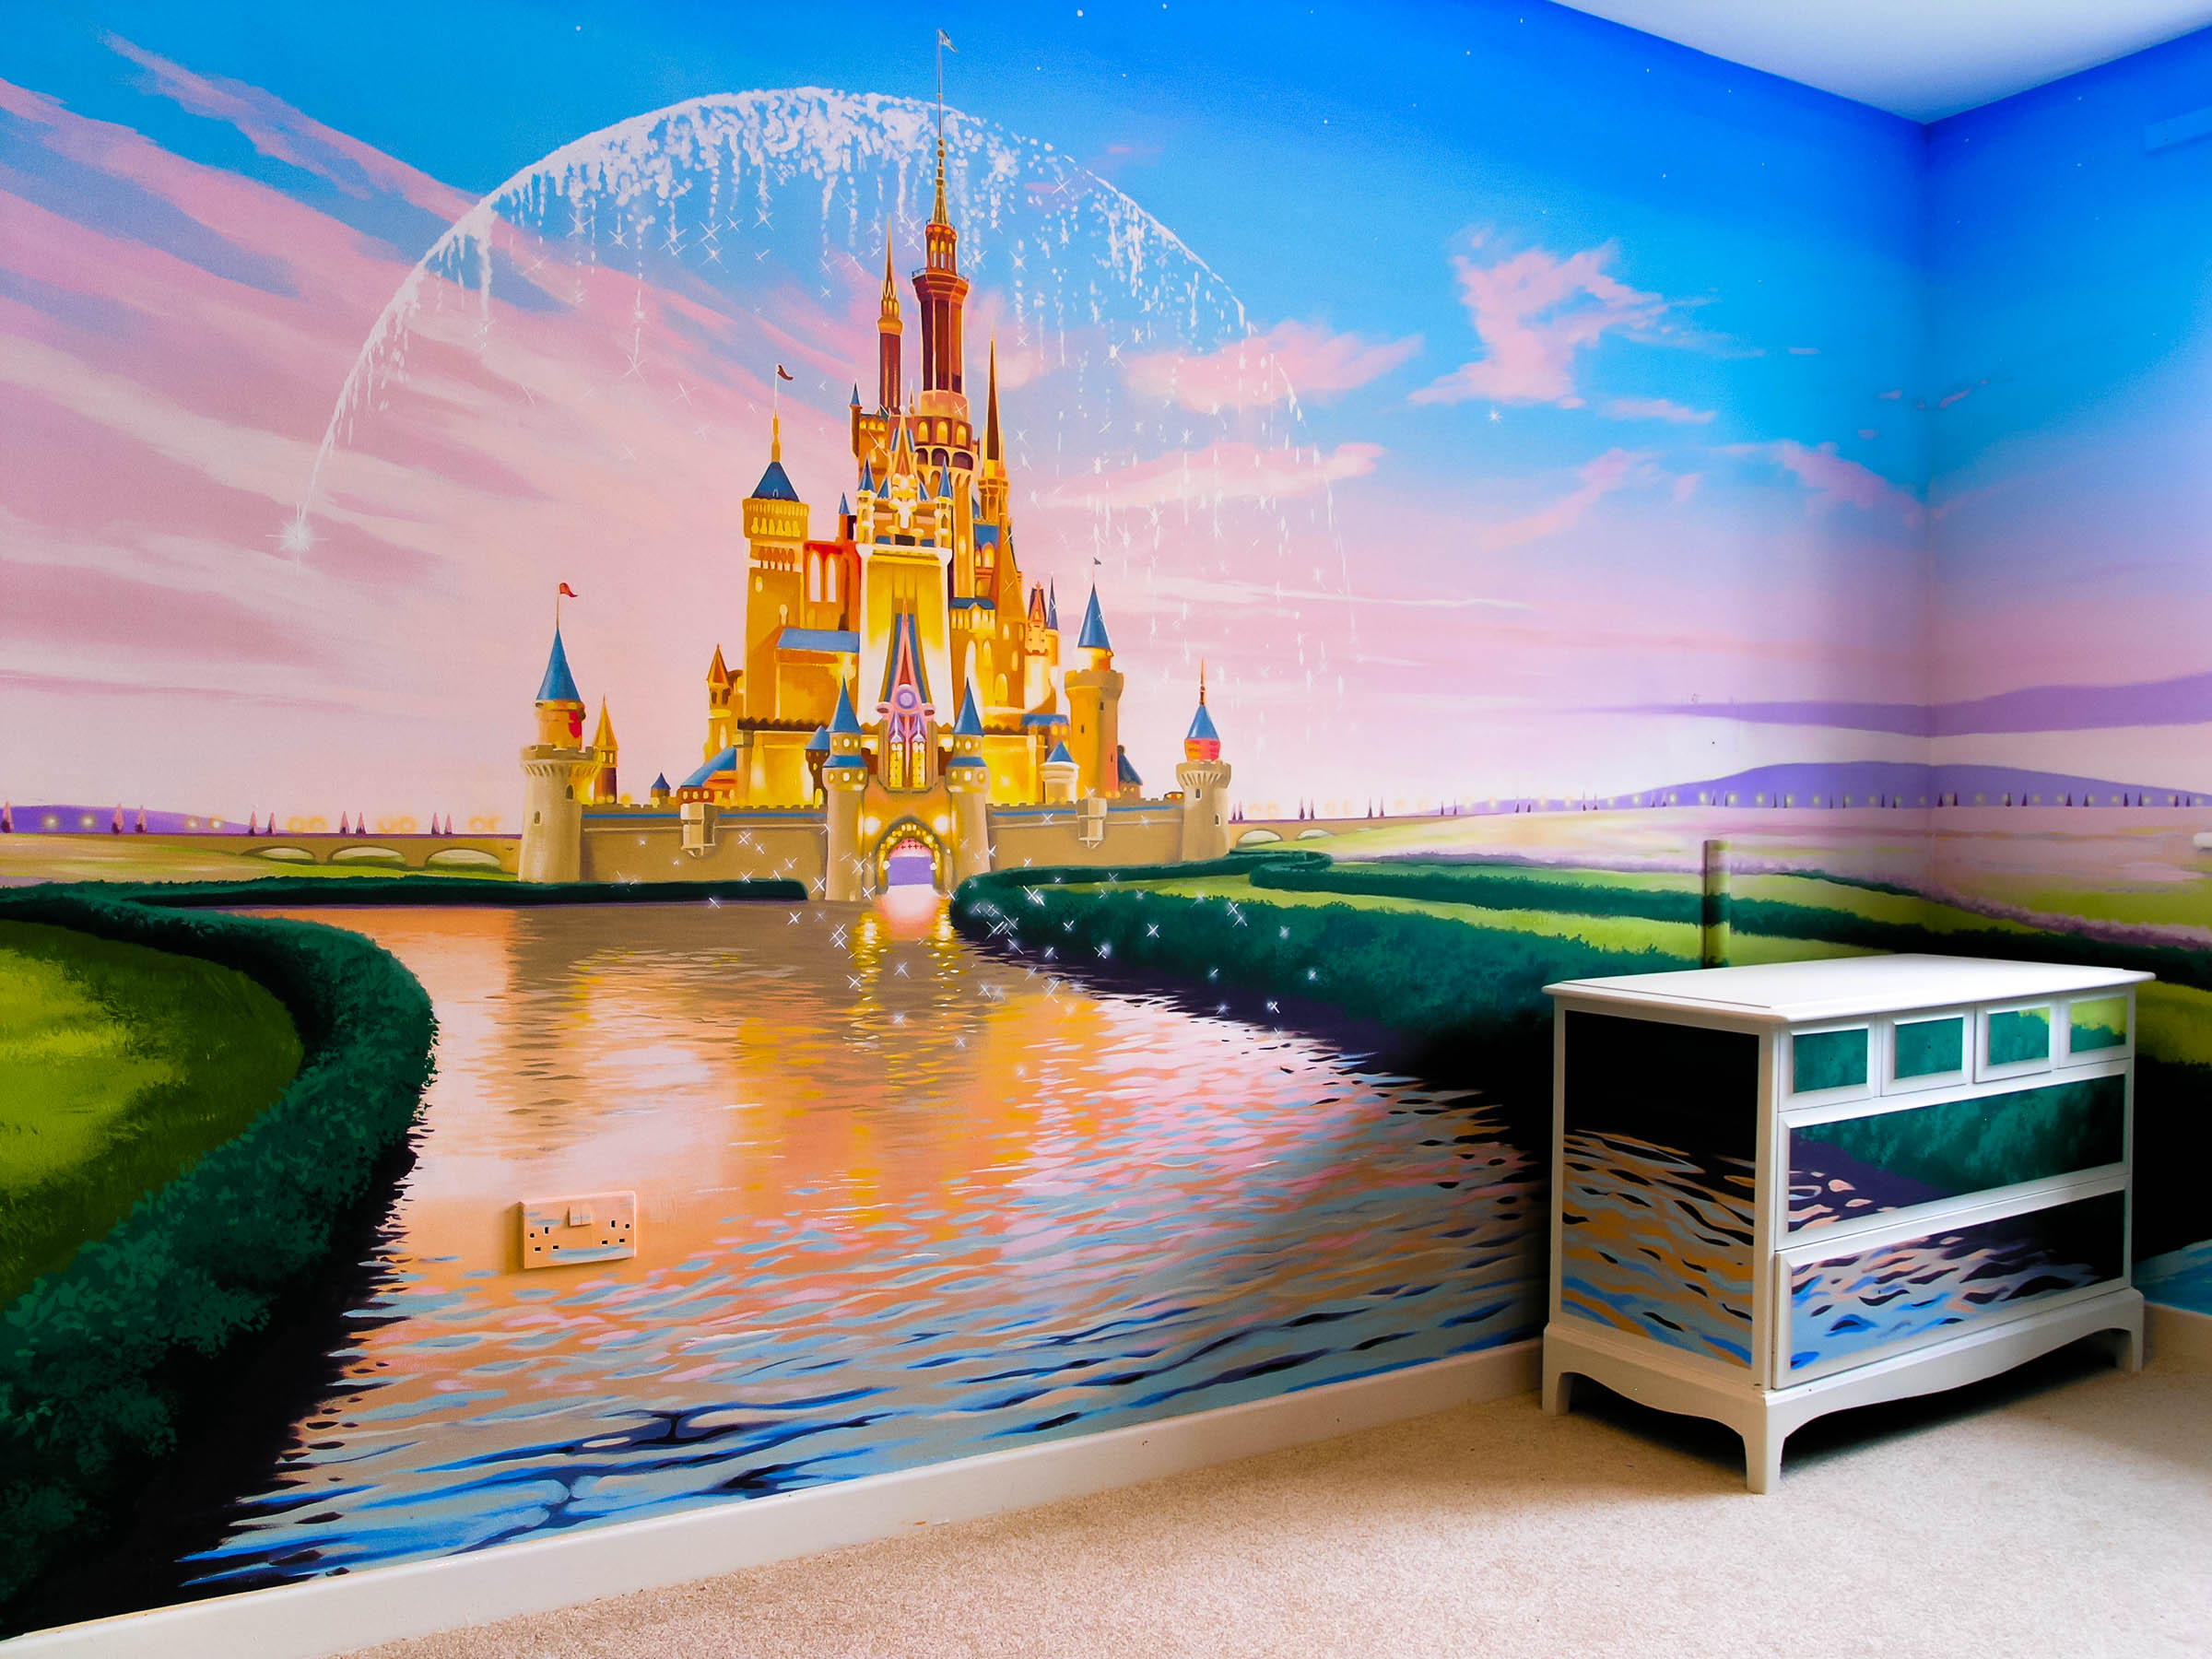 Disney Castle Bedroom with matching furniture, all hand painted.